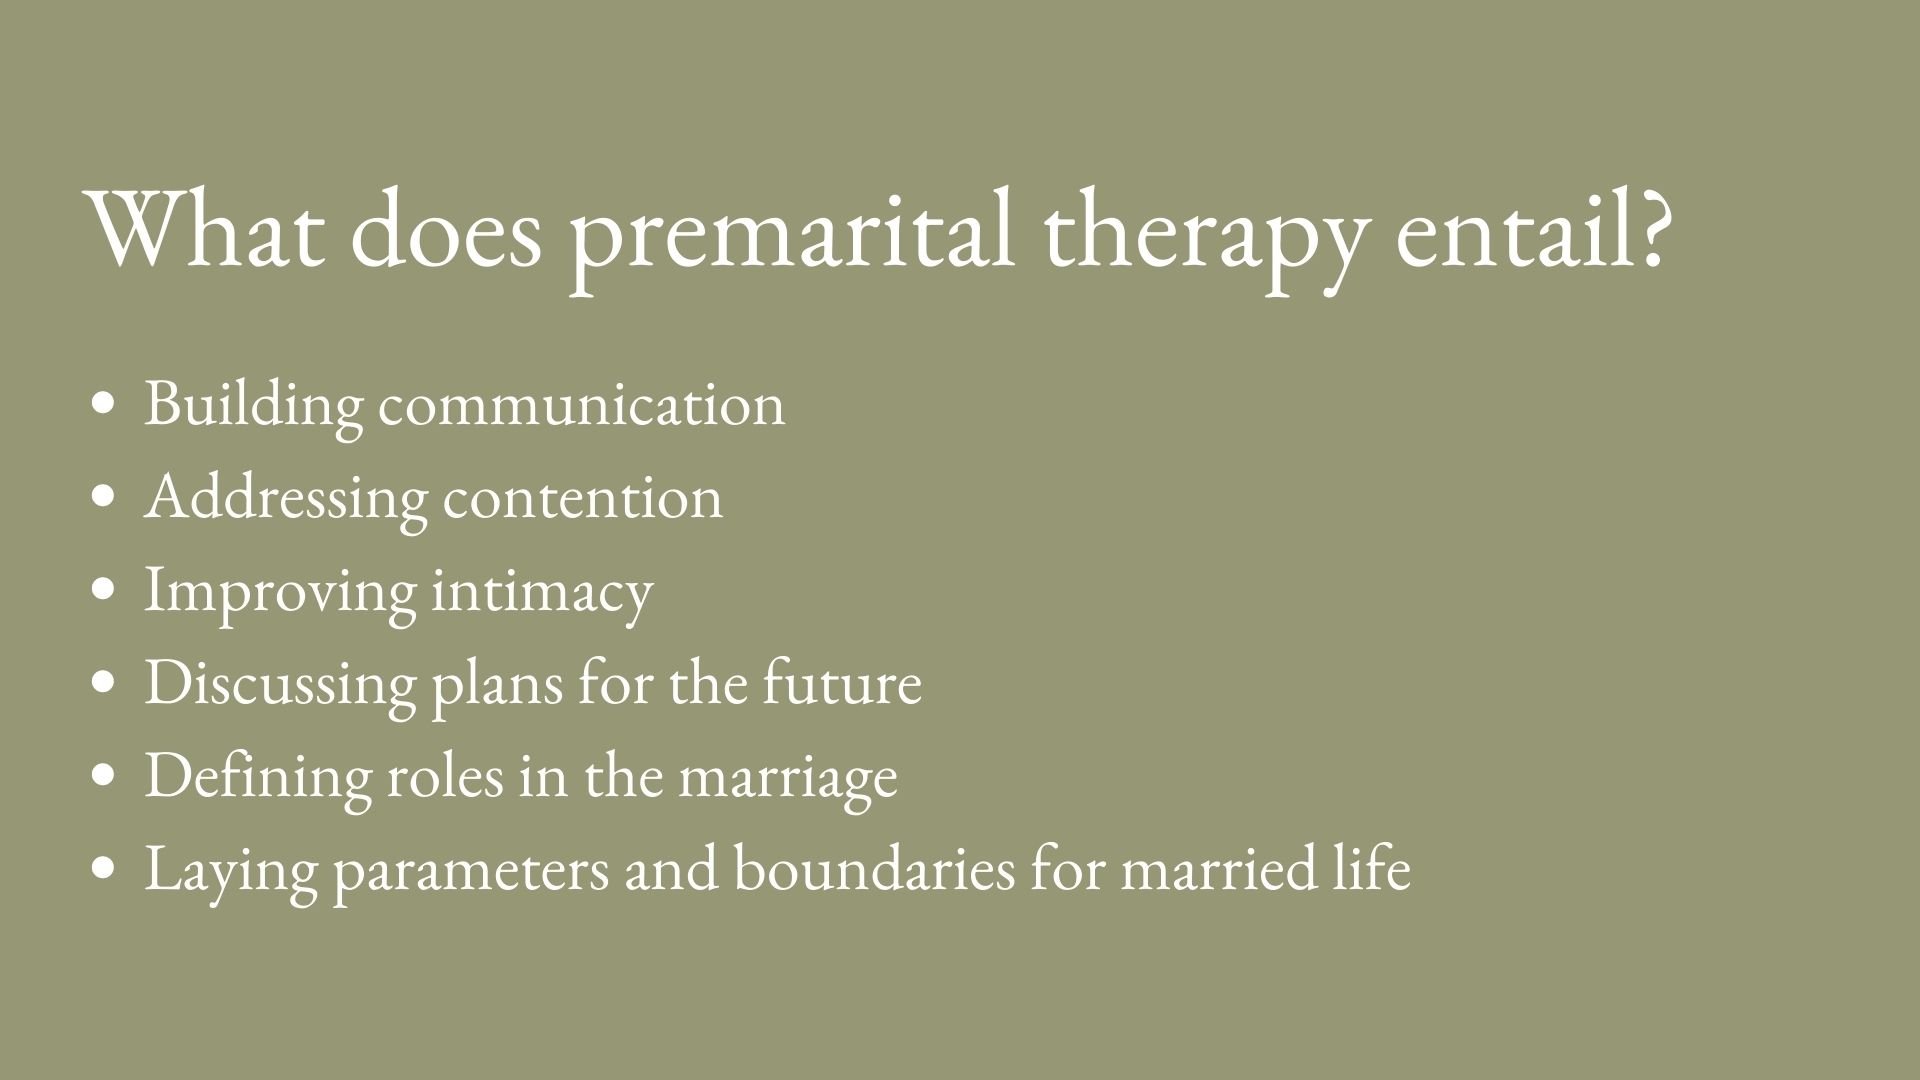 what does premarital therapy entail - list of points